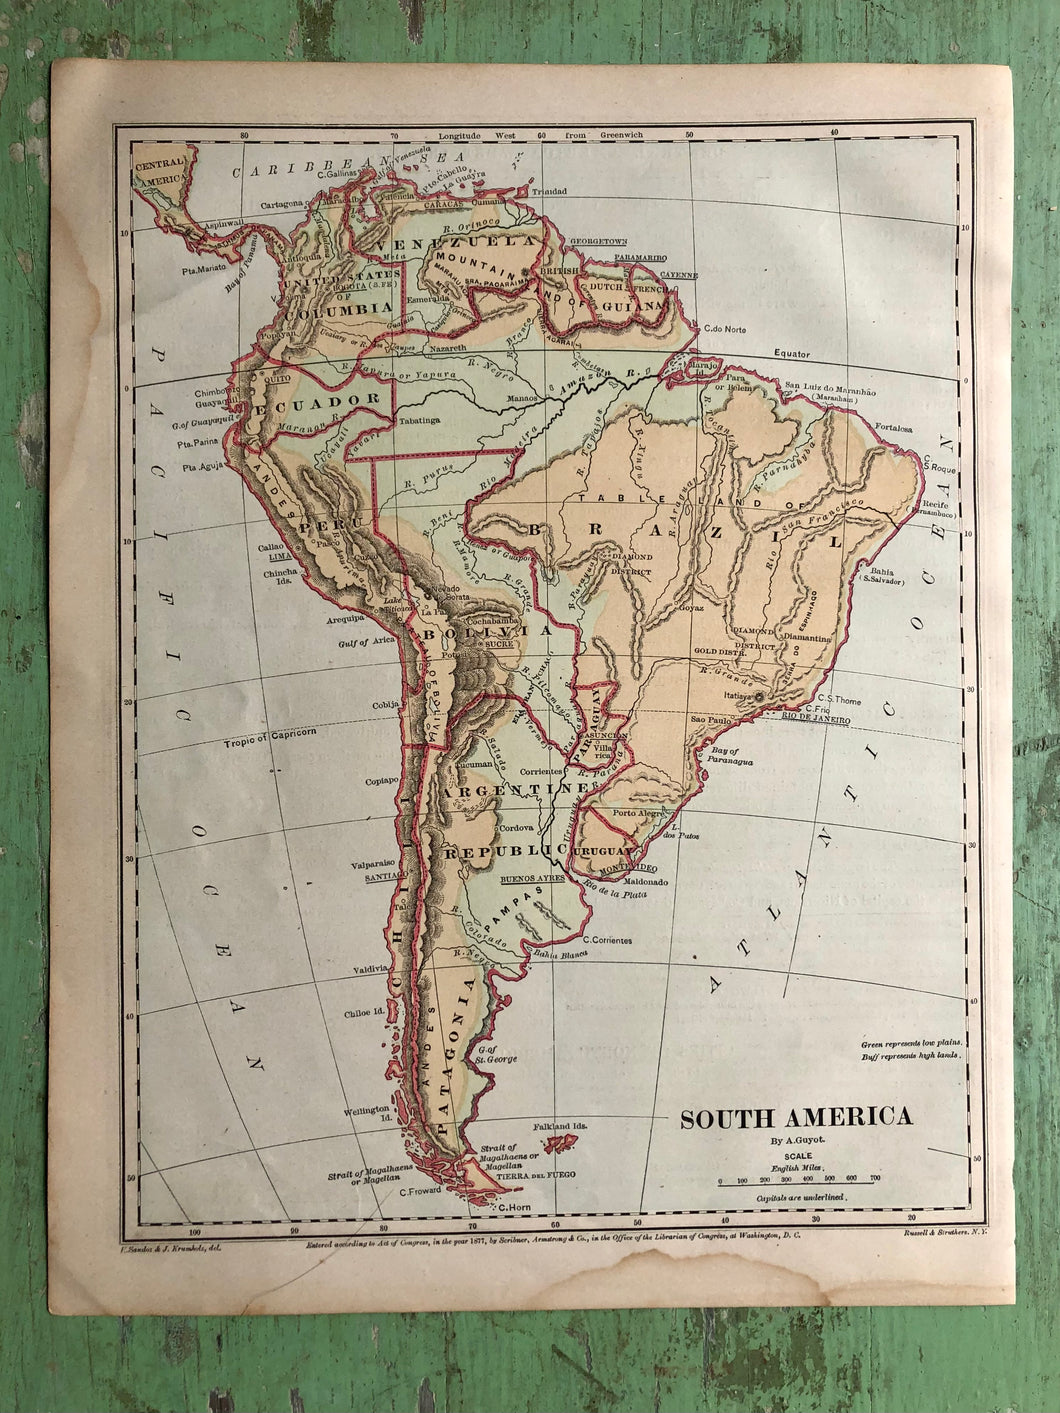 Map of South America from Guyot's New Intermediate Geography